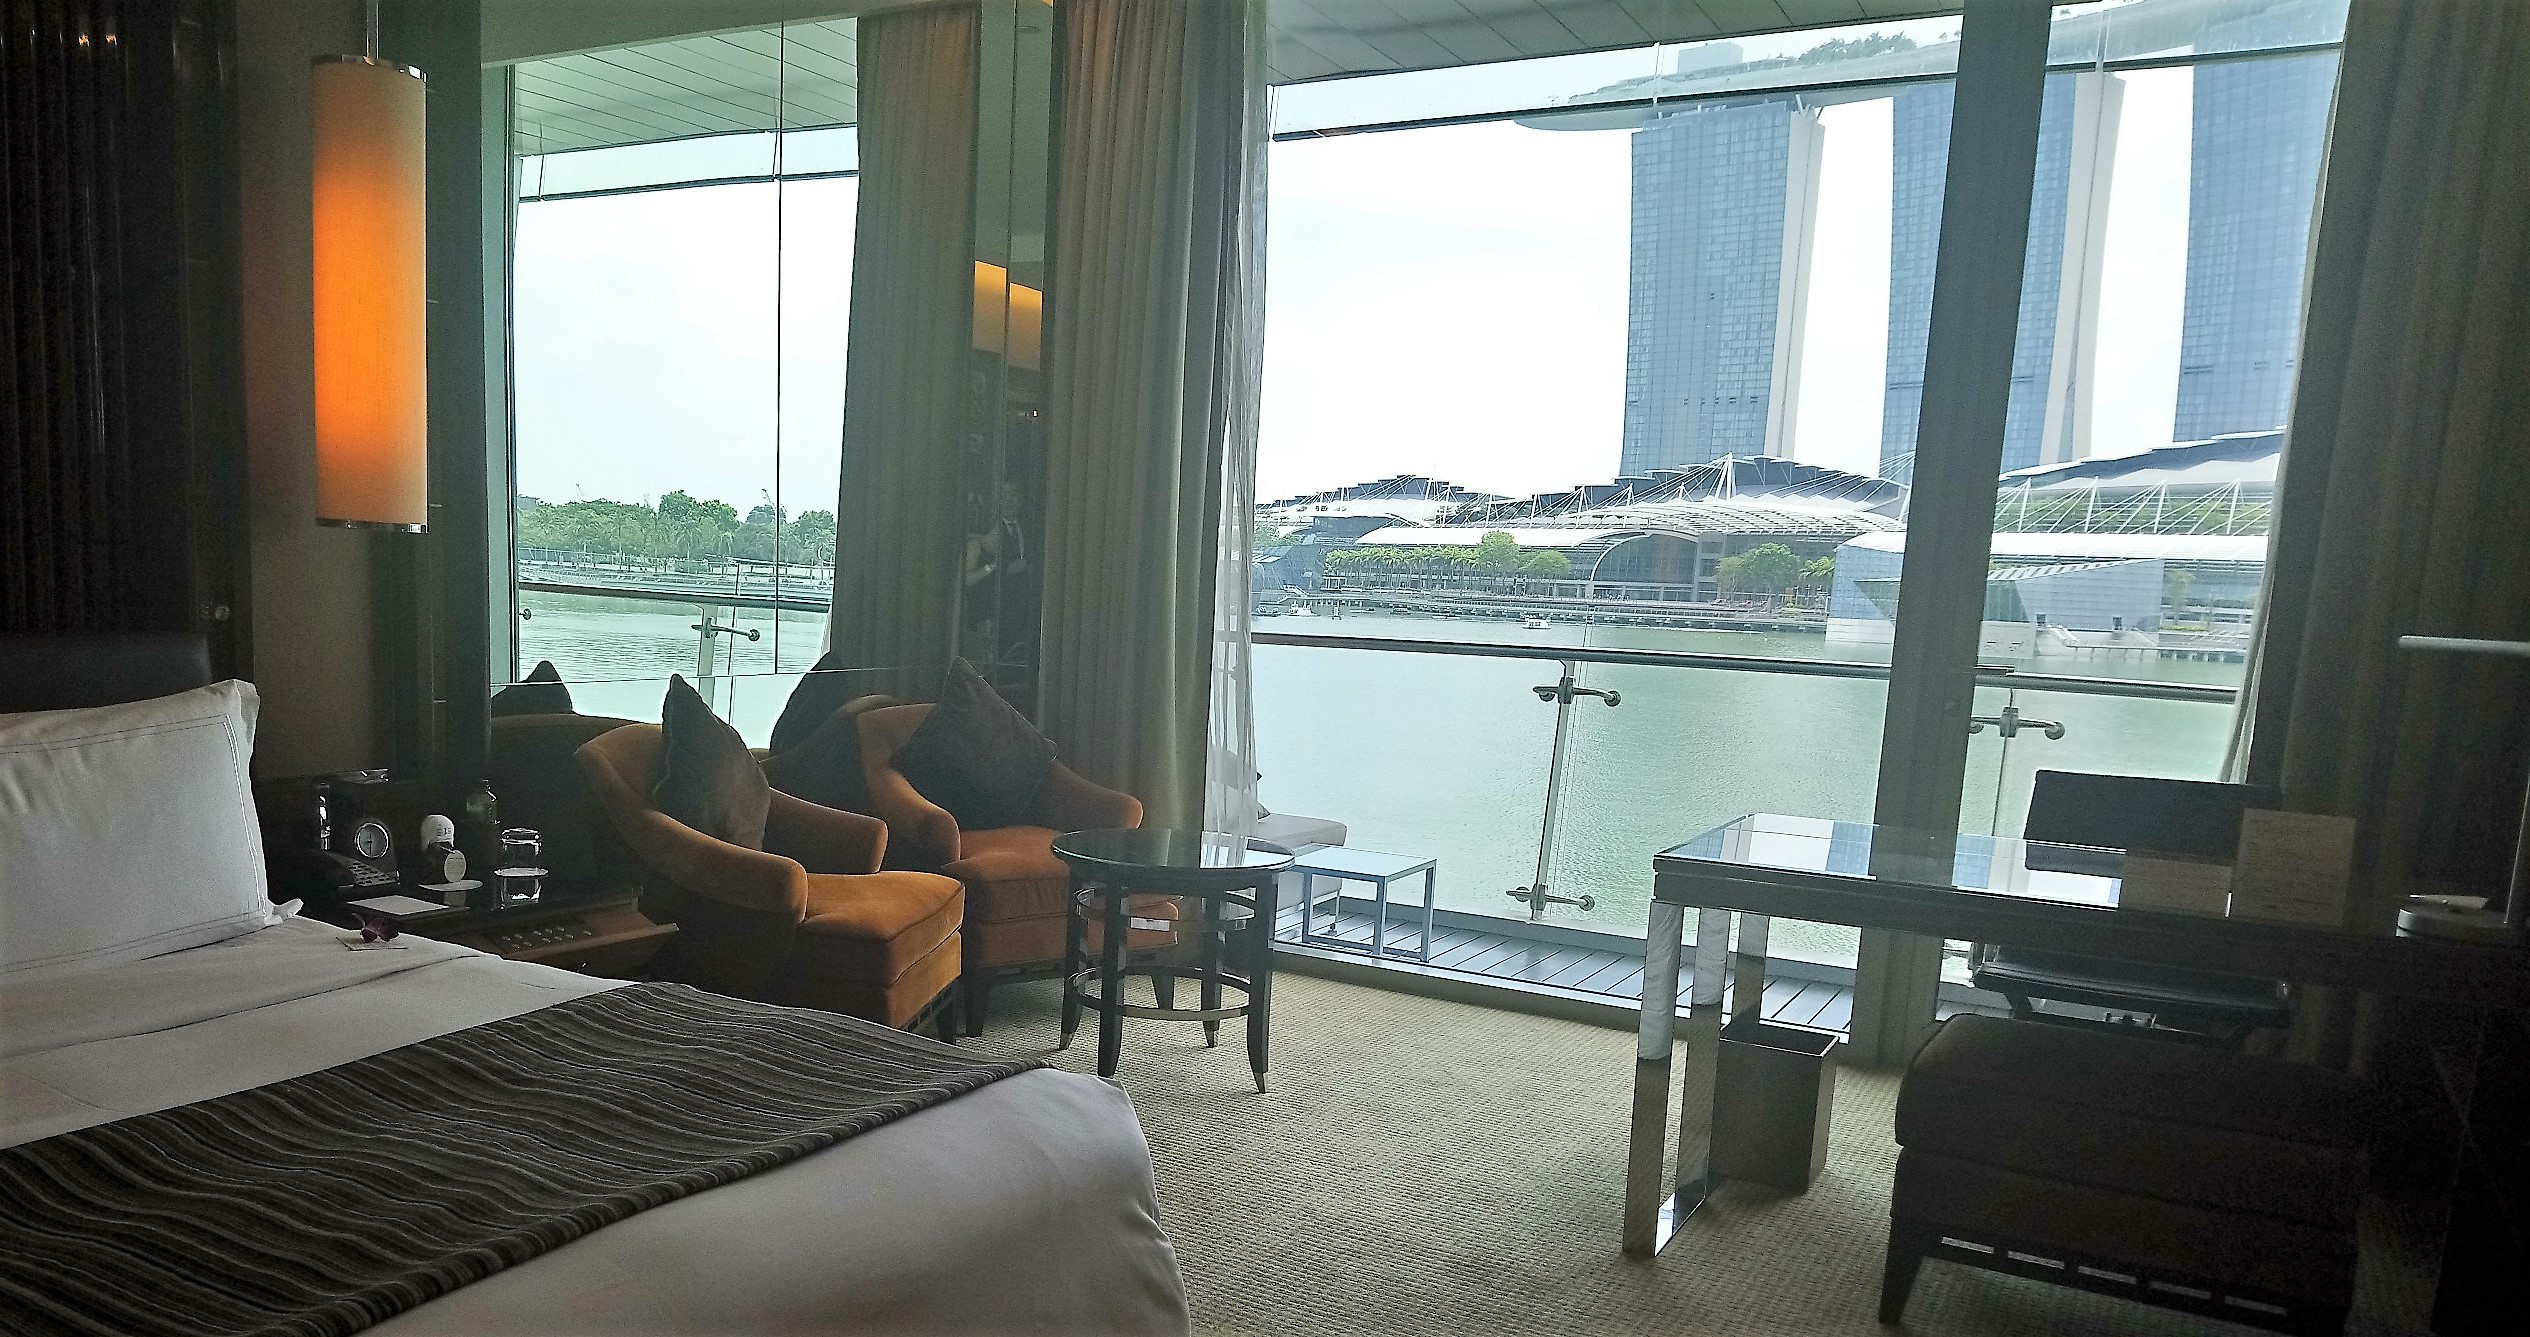 View of the balcony in a Bay View Room at The Fullerton Bay Hotel Singapore